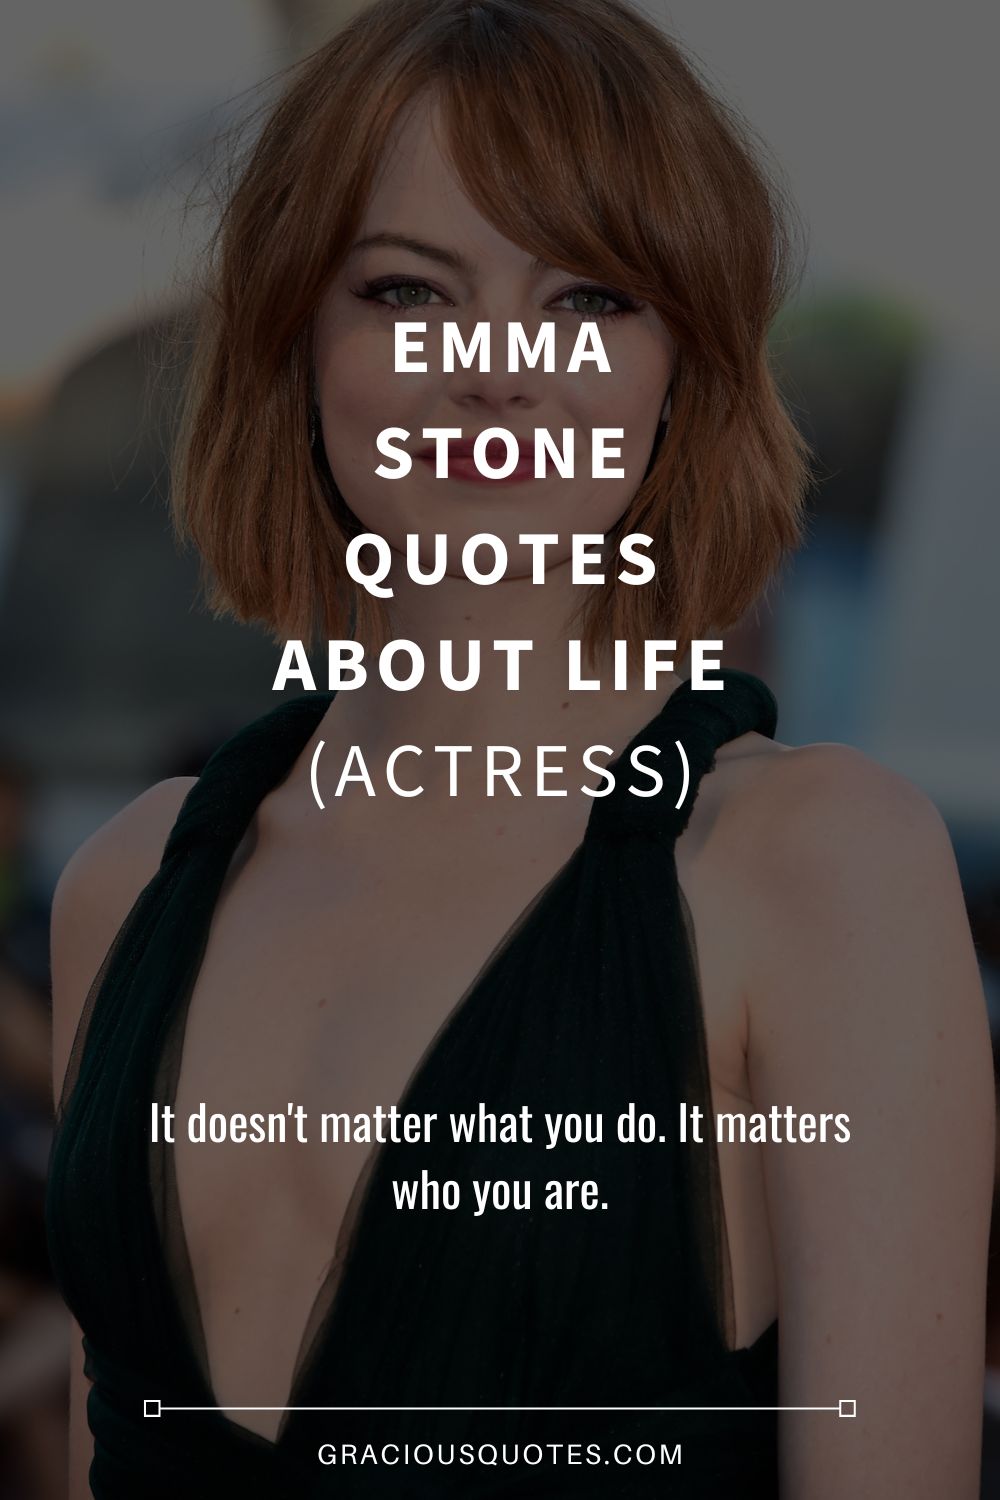 Emma Stone Quotes About Life (ACTRESS) - Gracious Quotes